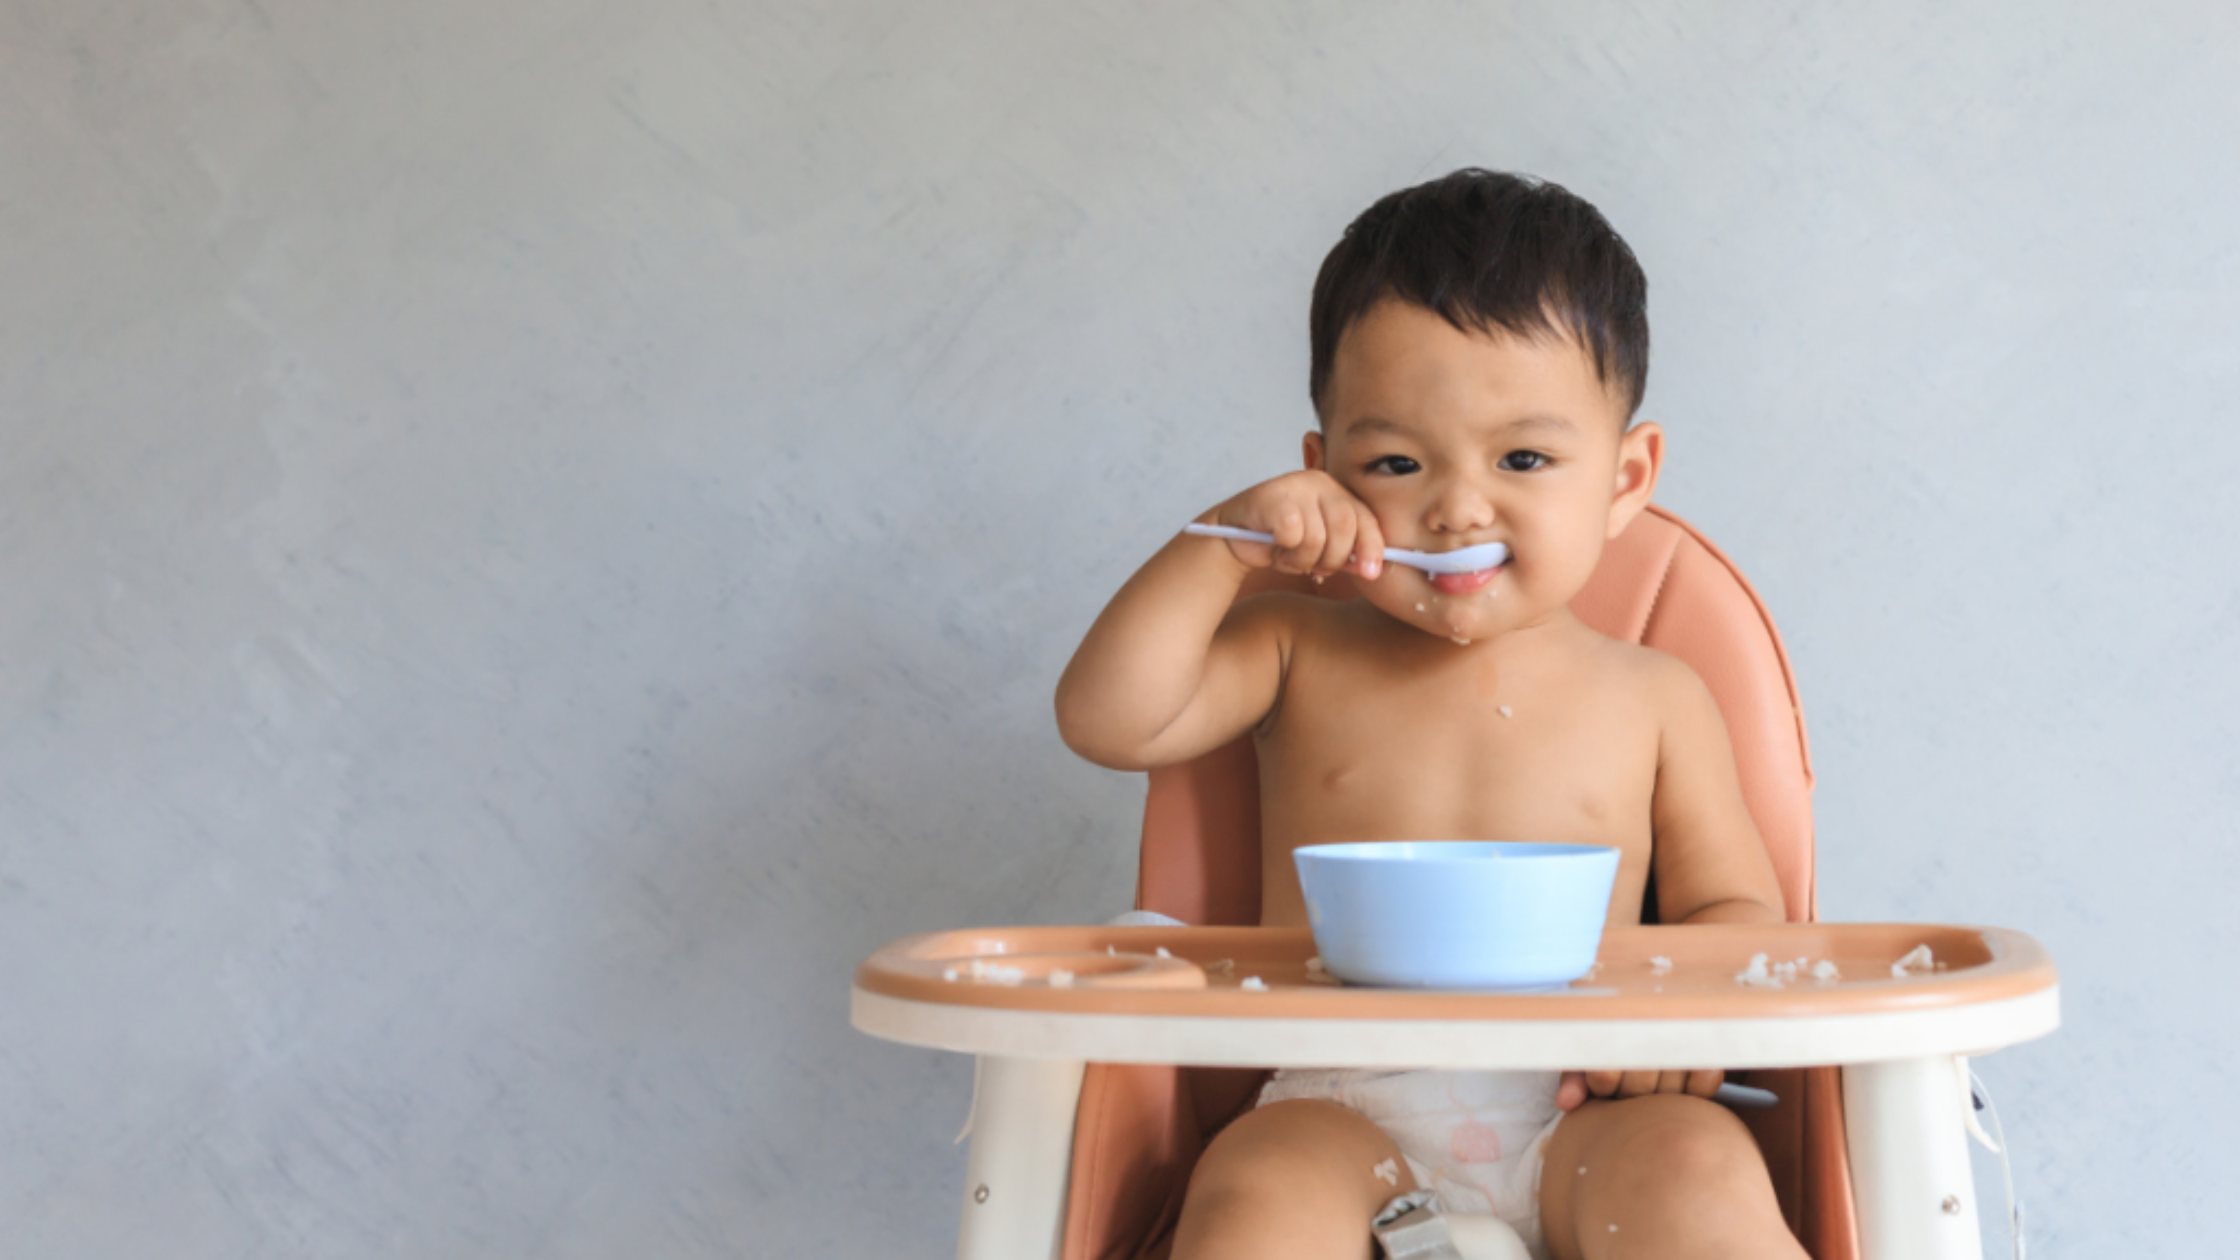 When are Babies Ready for Solid Foods?